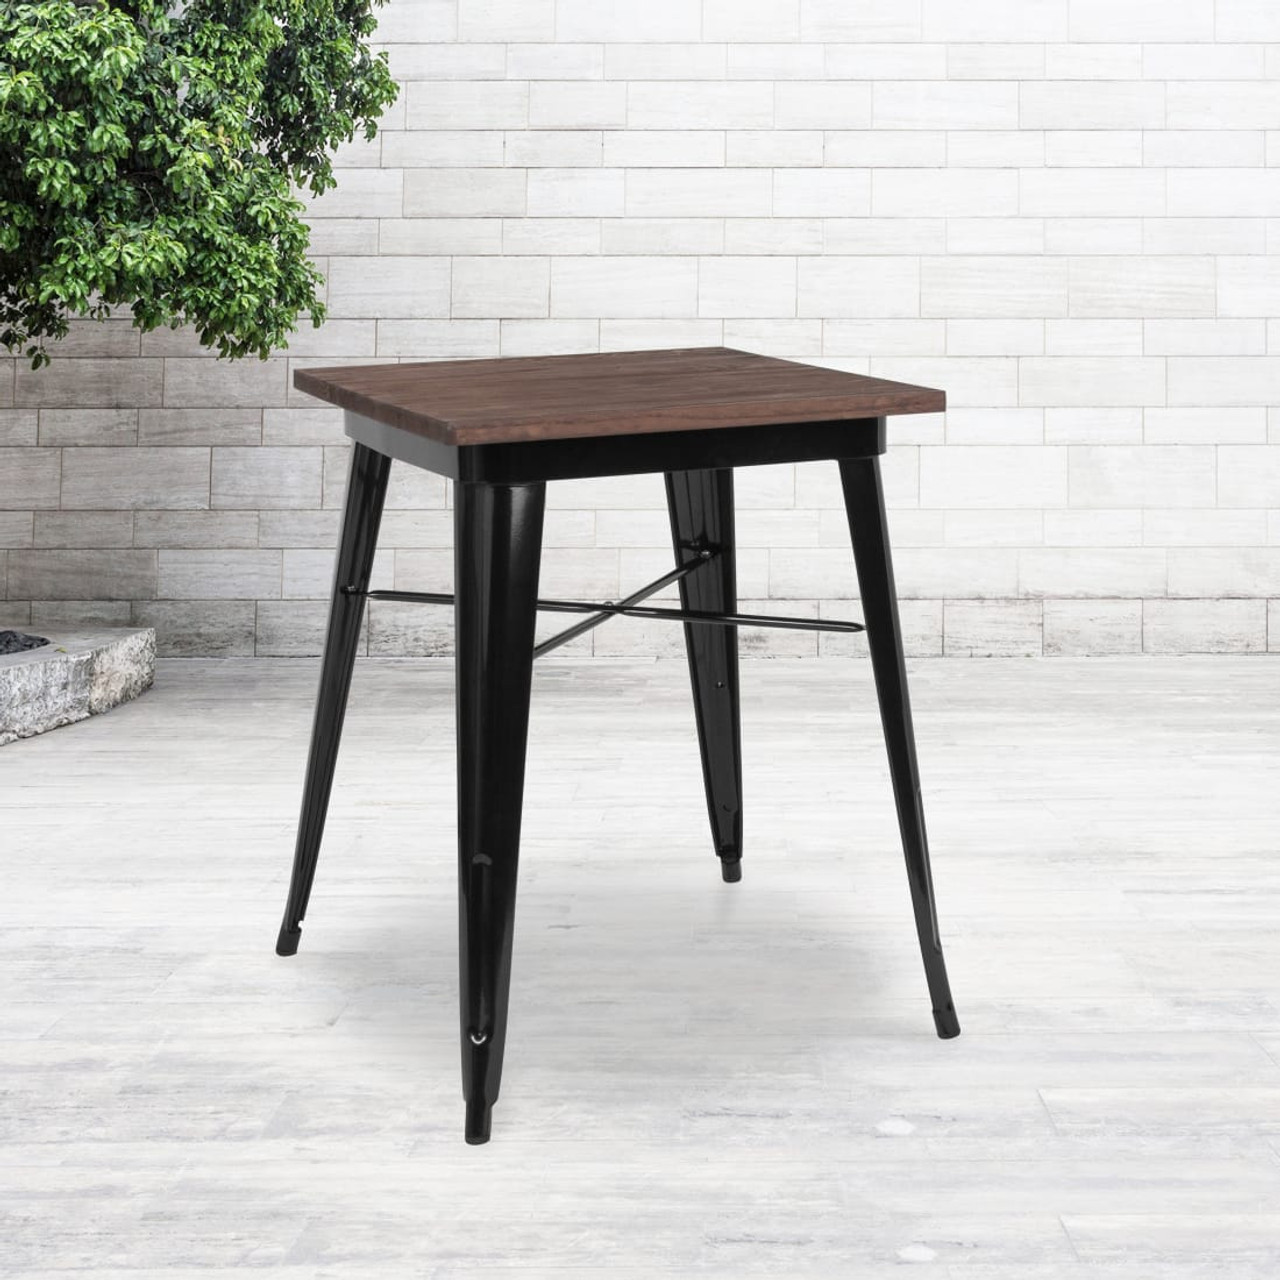 23.5” Square Black Metal Indoor Table with Walnut Rustic Wood Top